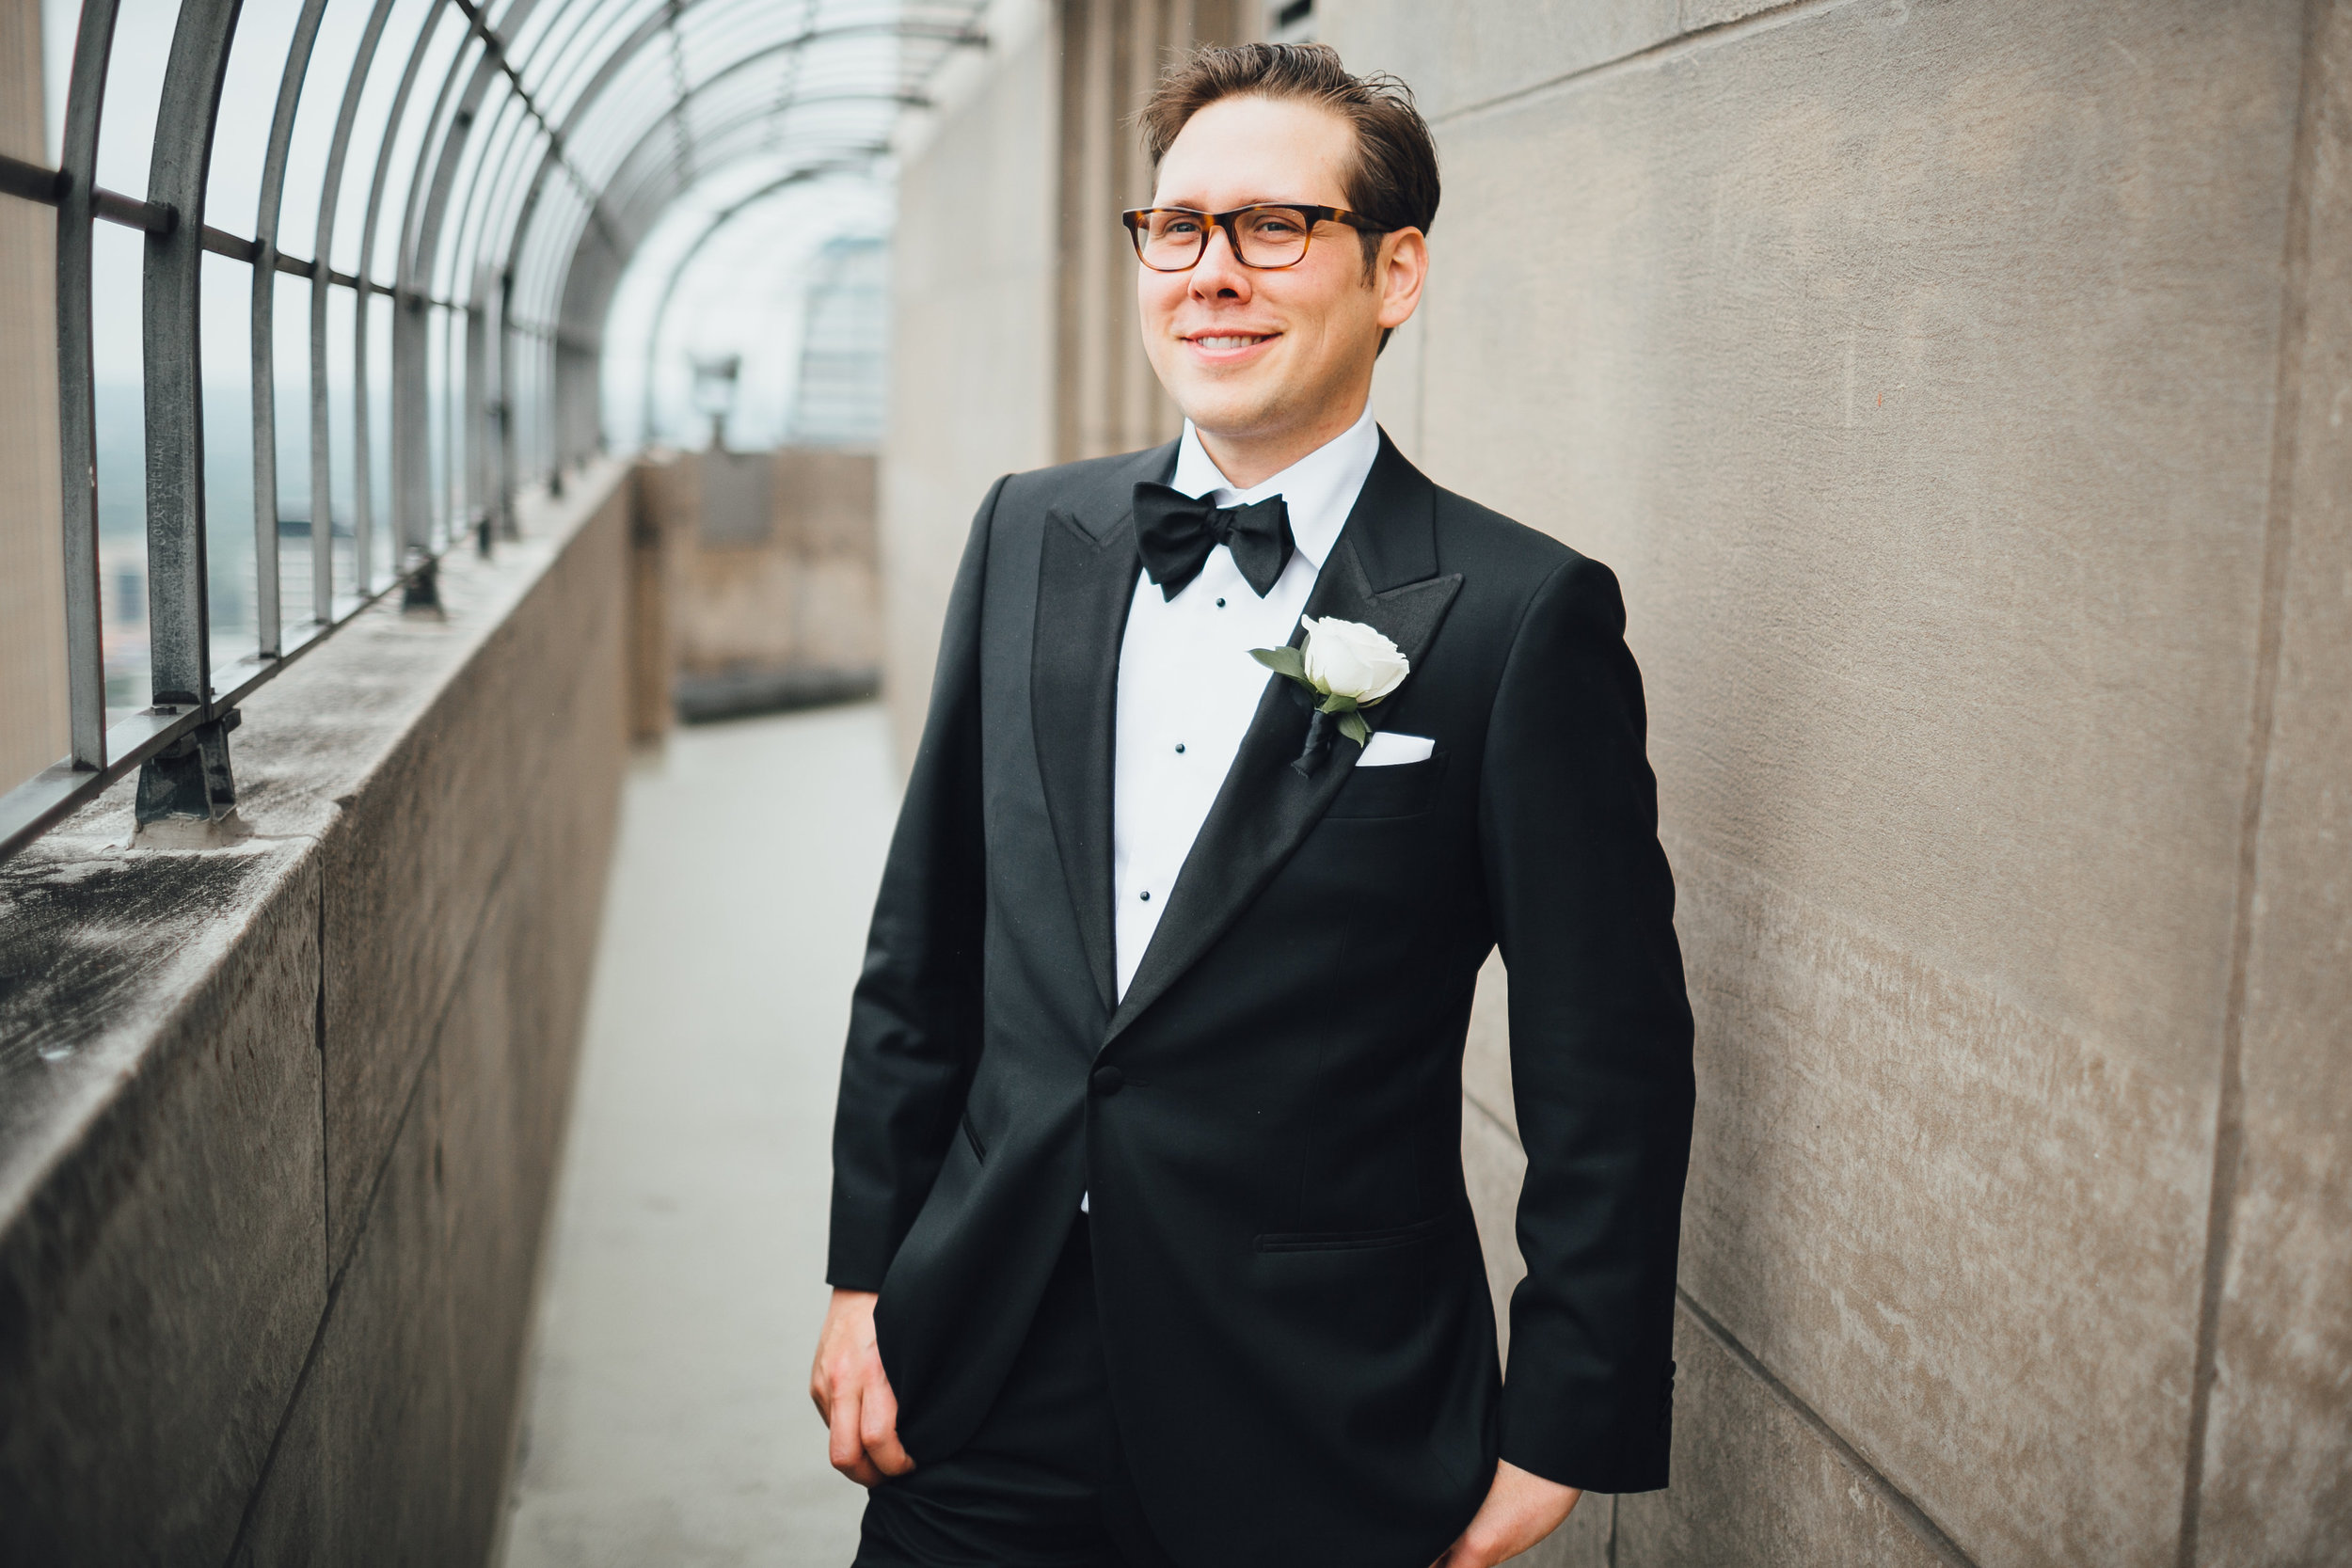 Groom smiling in black tuxedo and white rose boutonniere